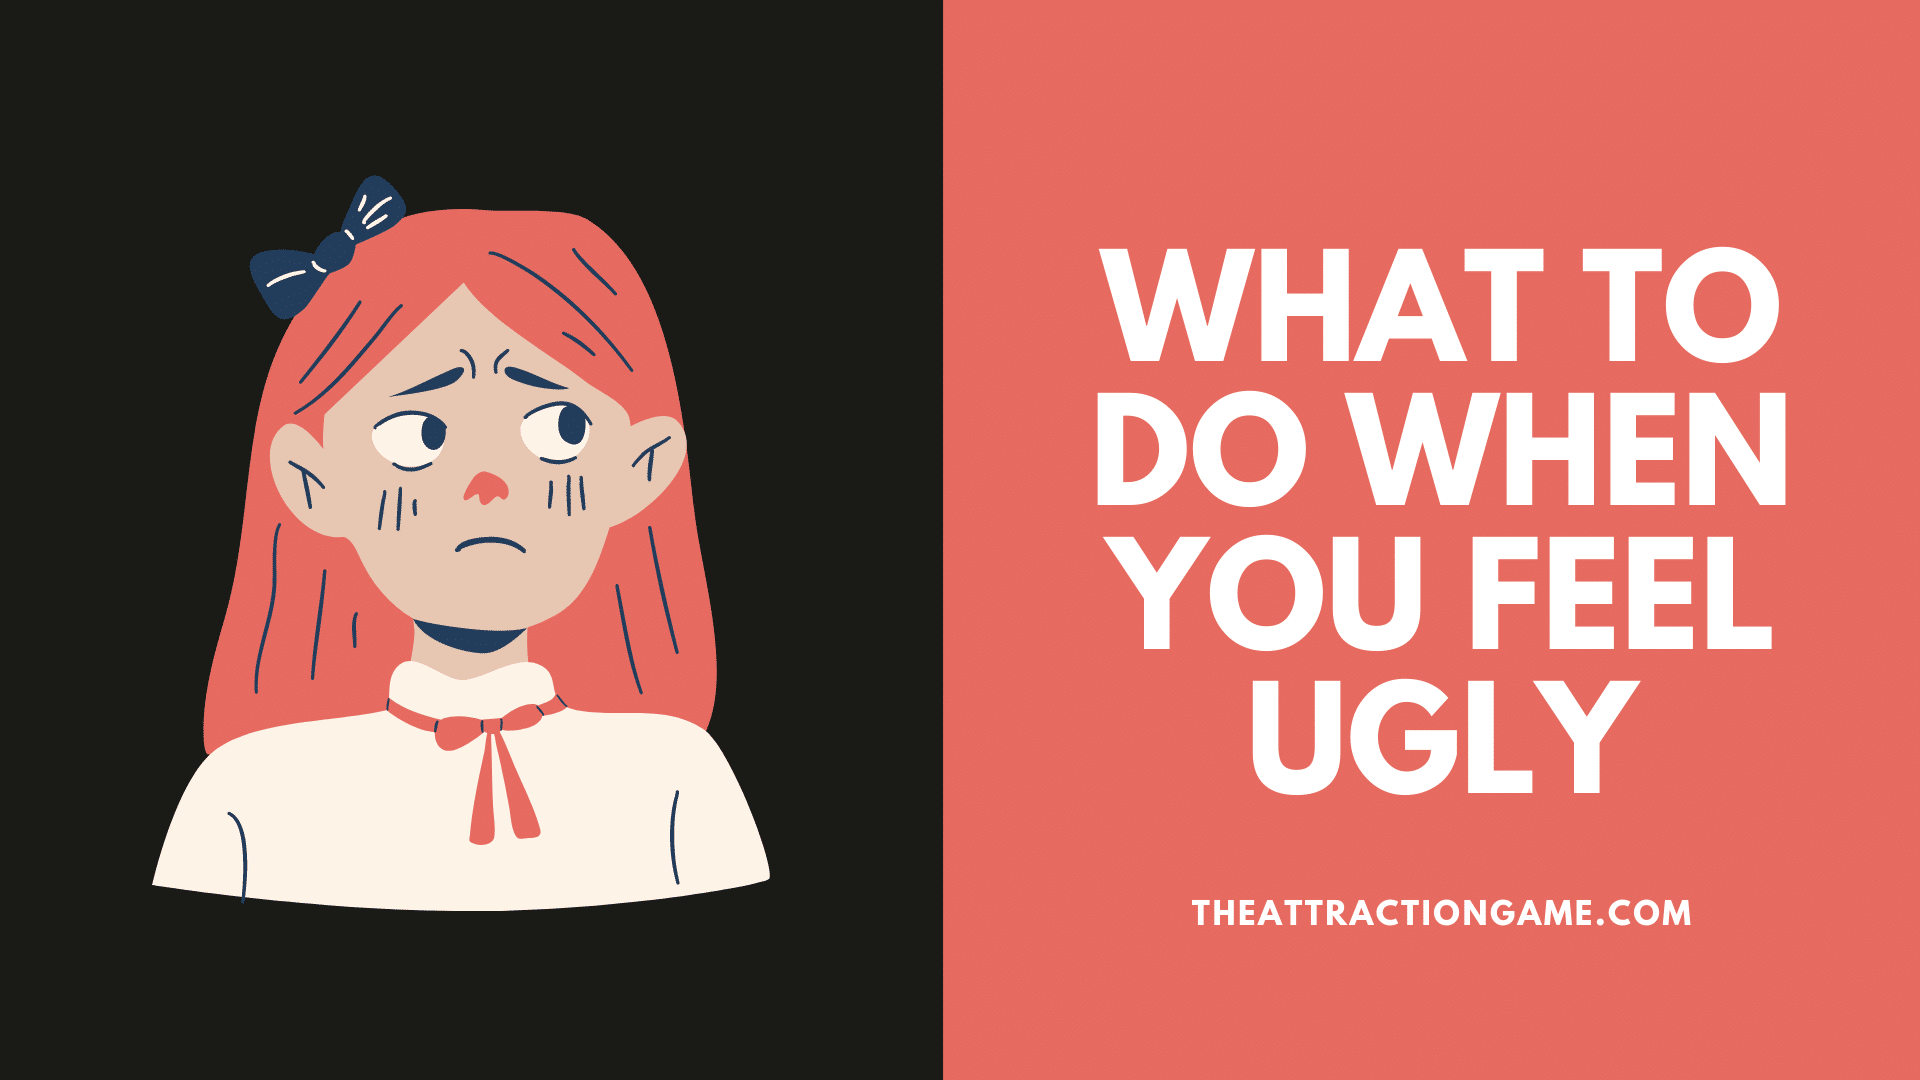 You if what do ugly to feel What do